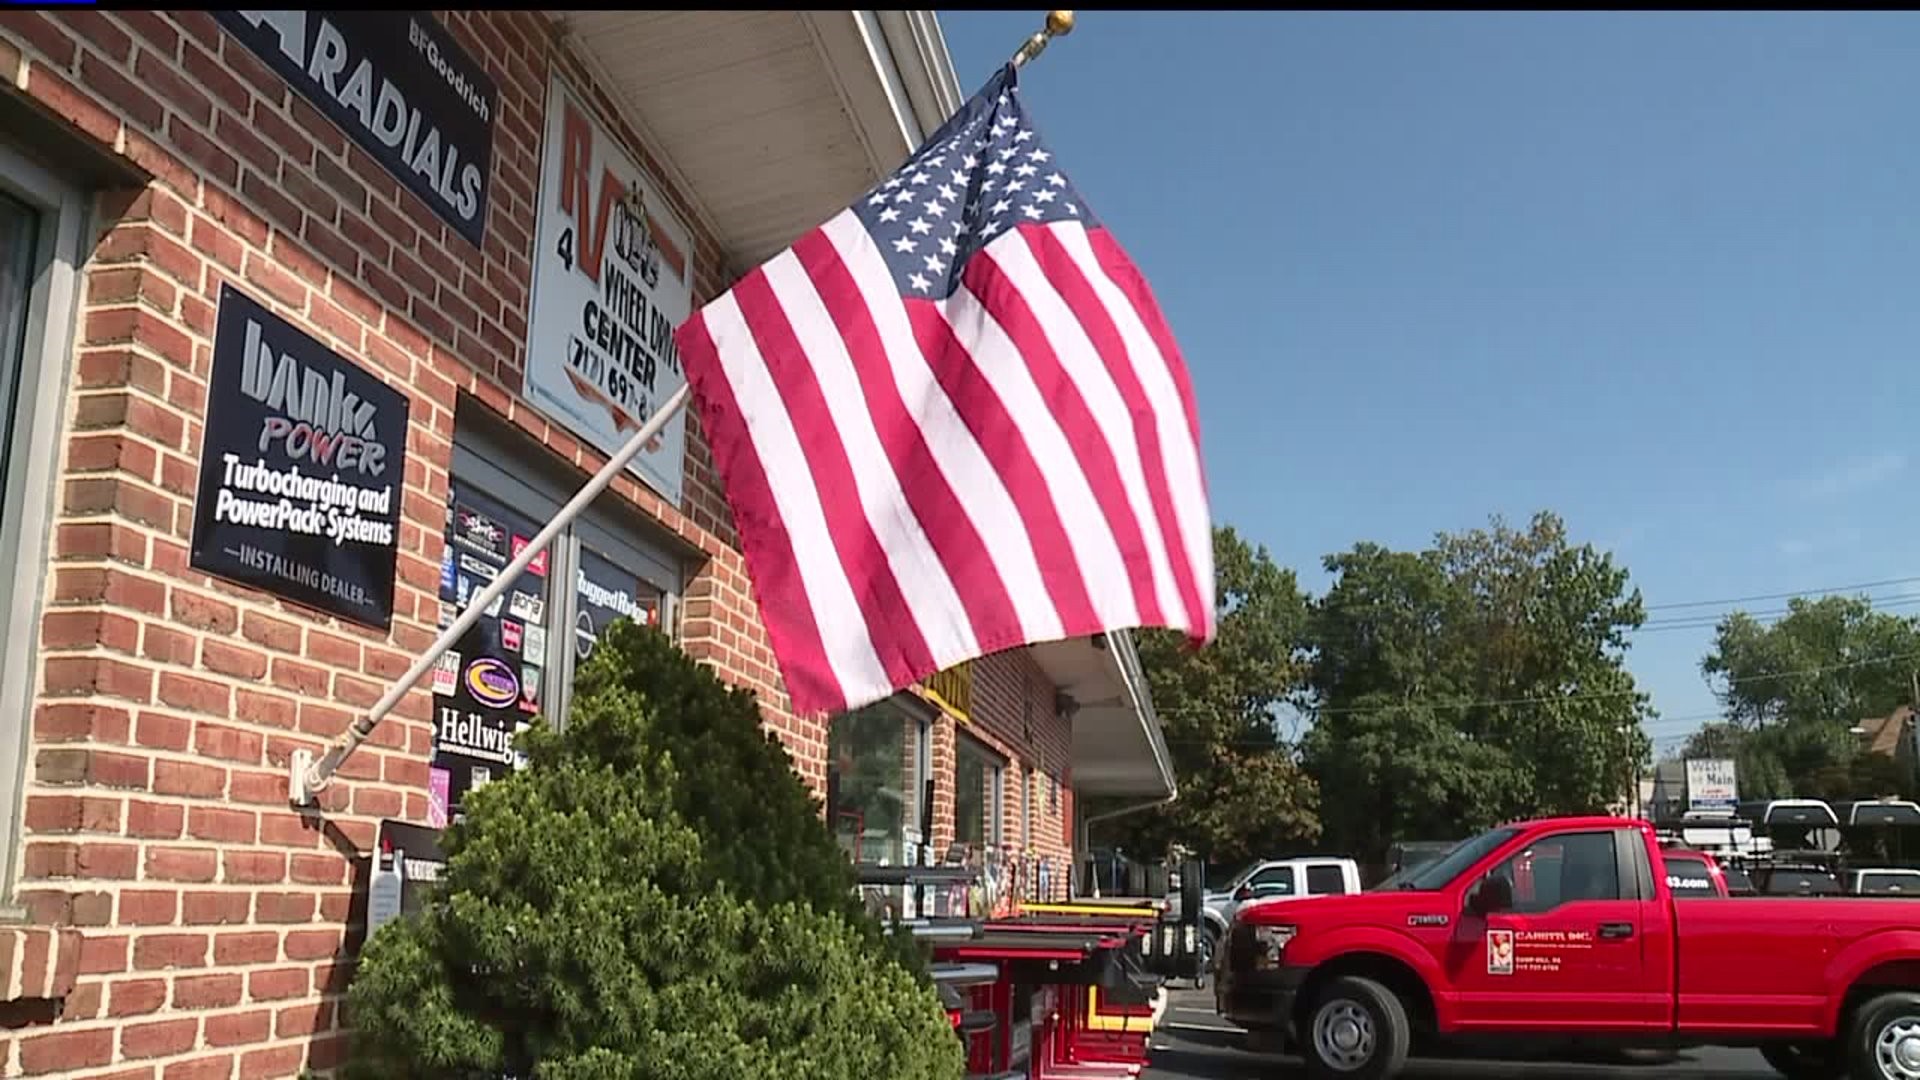 Local businesses in Cumberland and Lancaster Counties respond to NFL controversy